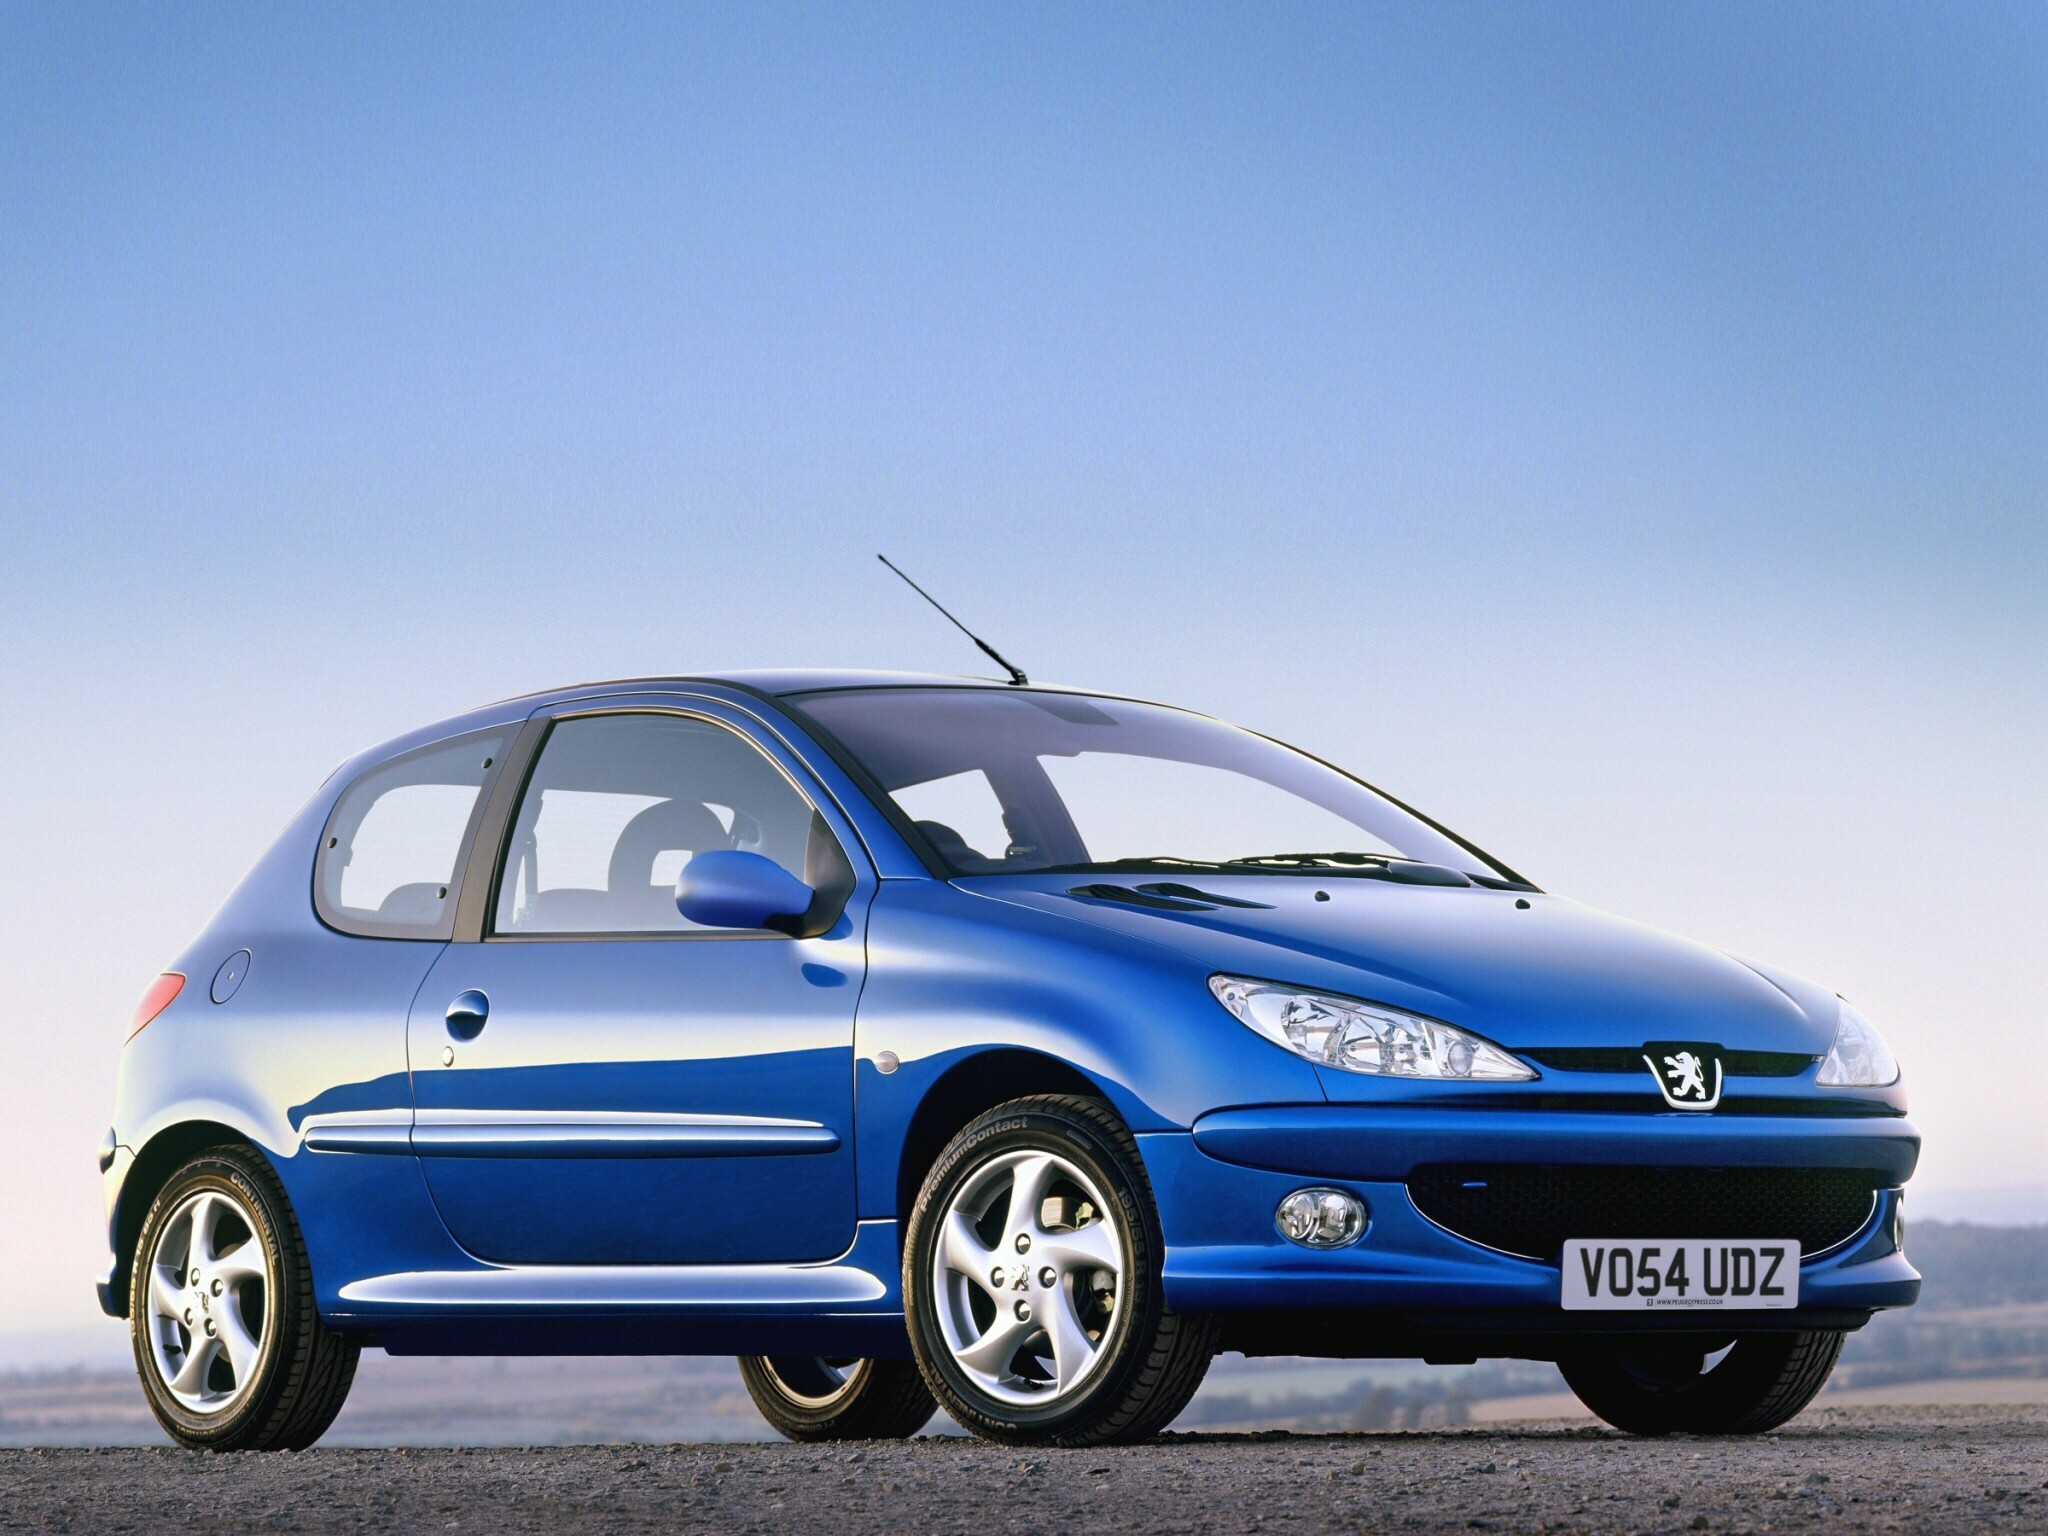 Peugeot: Model 206, Vehicles, The first steering wheel was adopted on the Type 36. 2050x1540 HD Wallpaper.